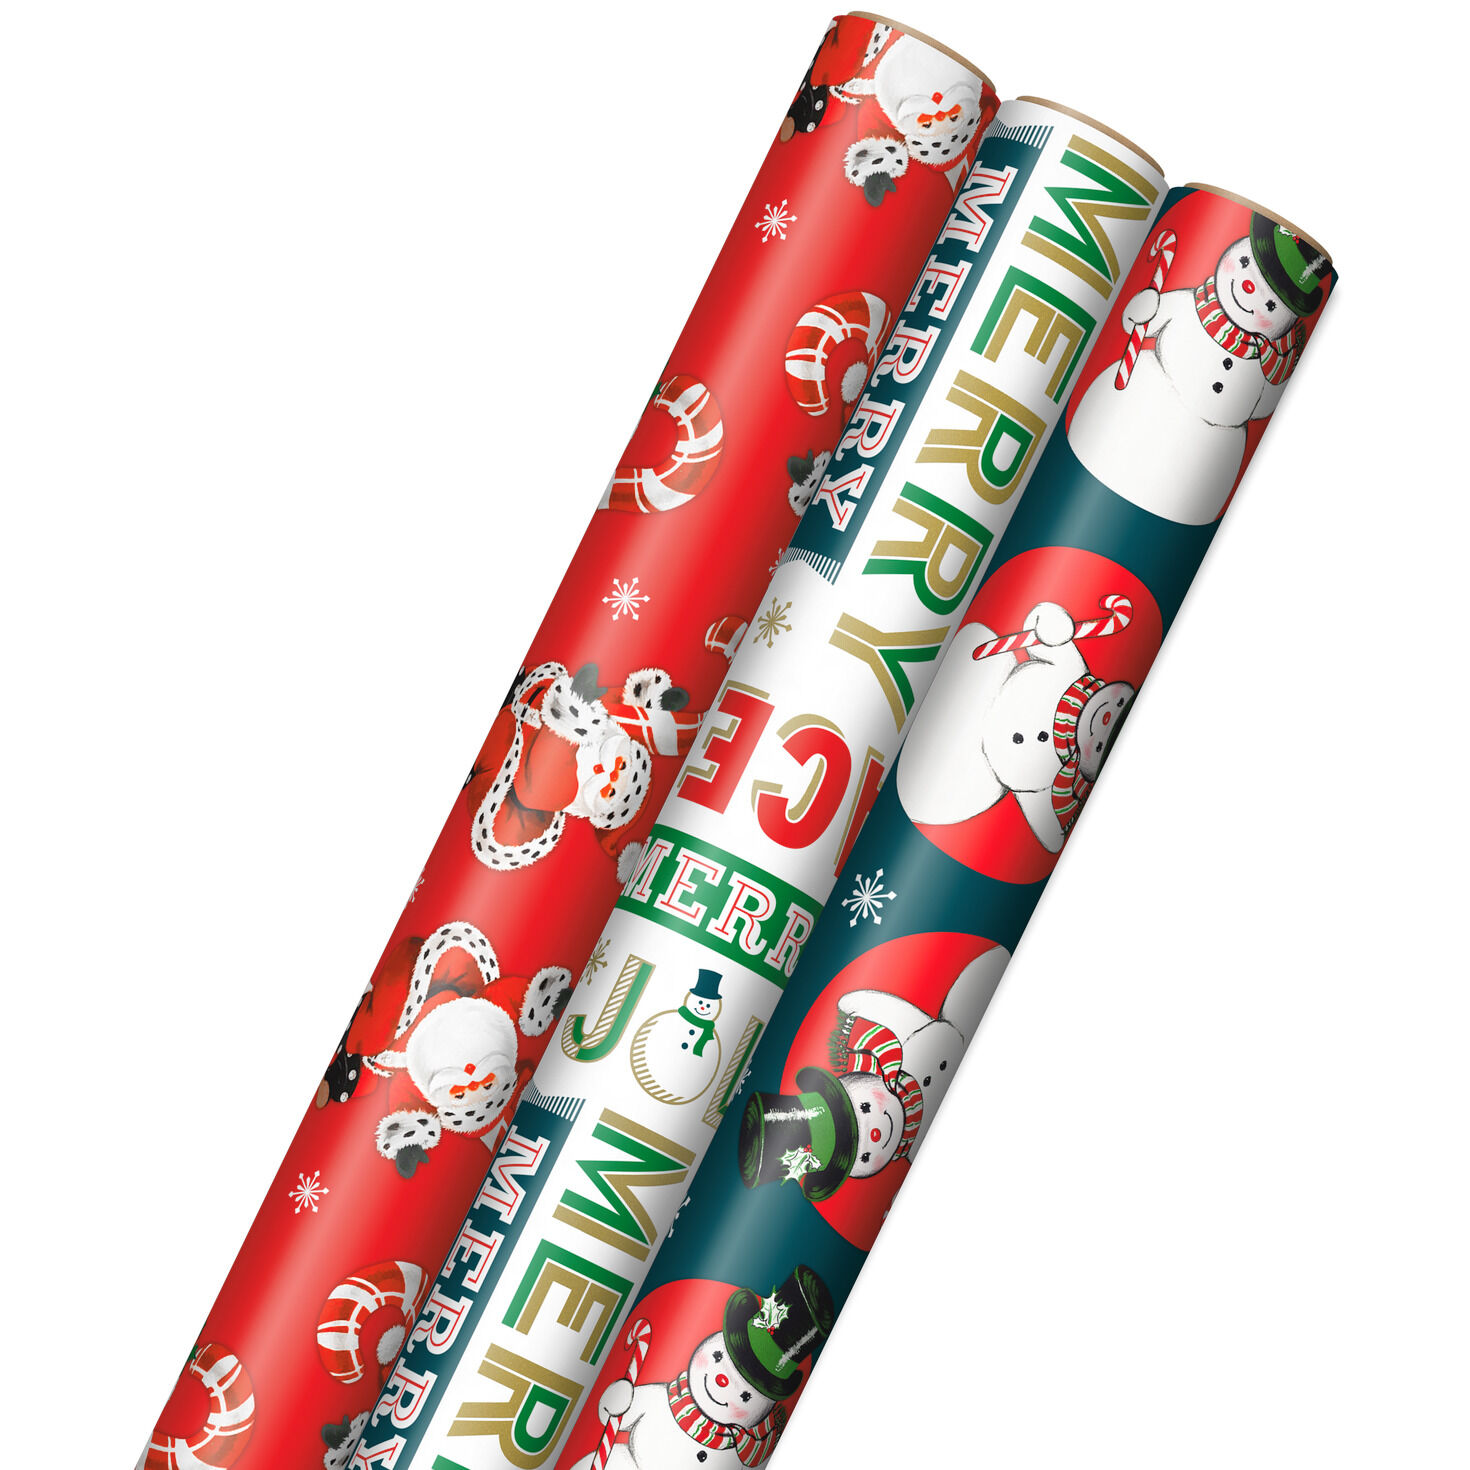 Very Vintage Christmas 3-Pack Assortment Wrapping Paper, 120 sq. ft. -  Wrapping Paper Sets - Hallmark